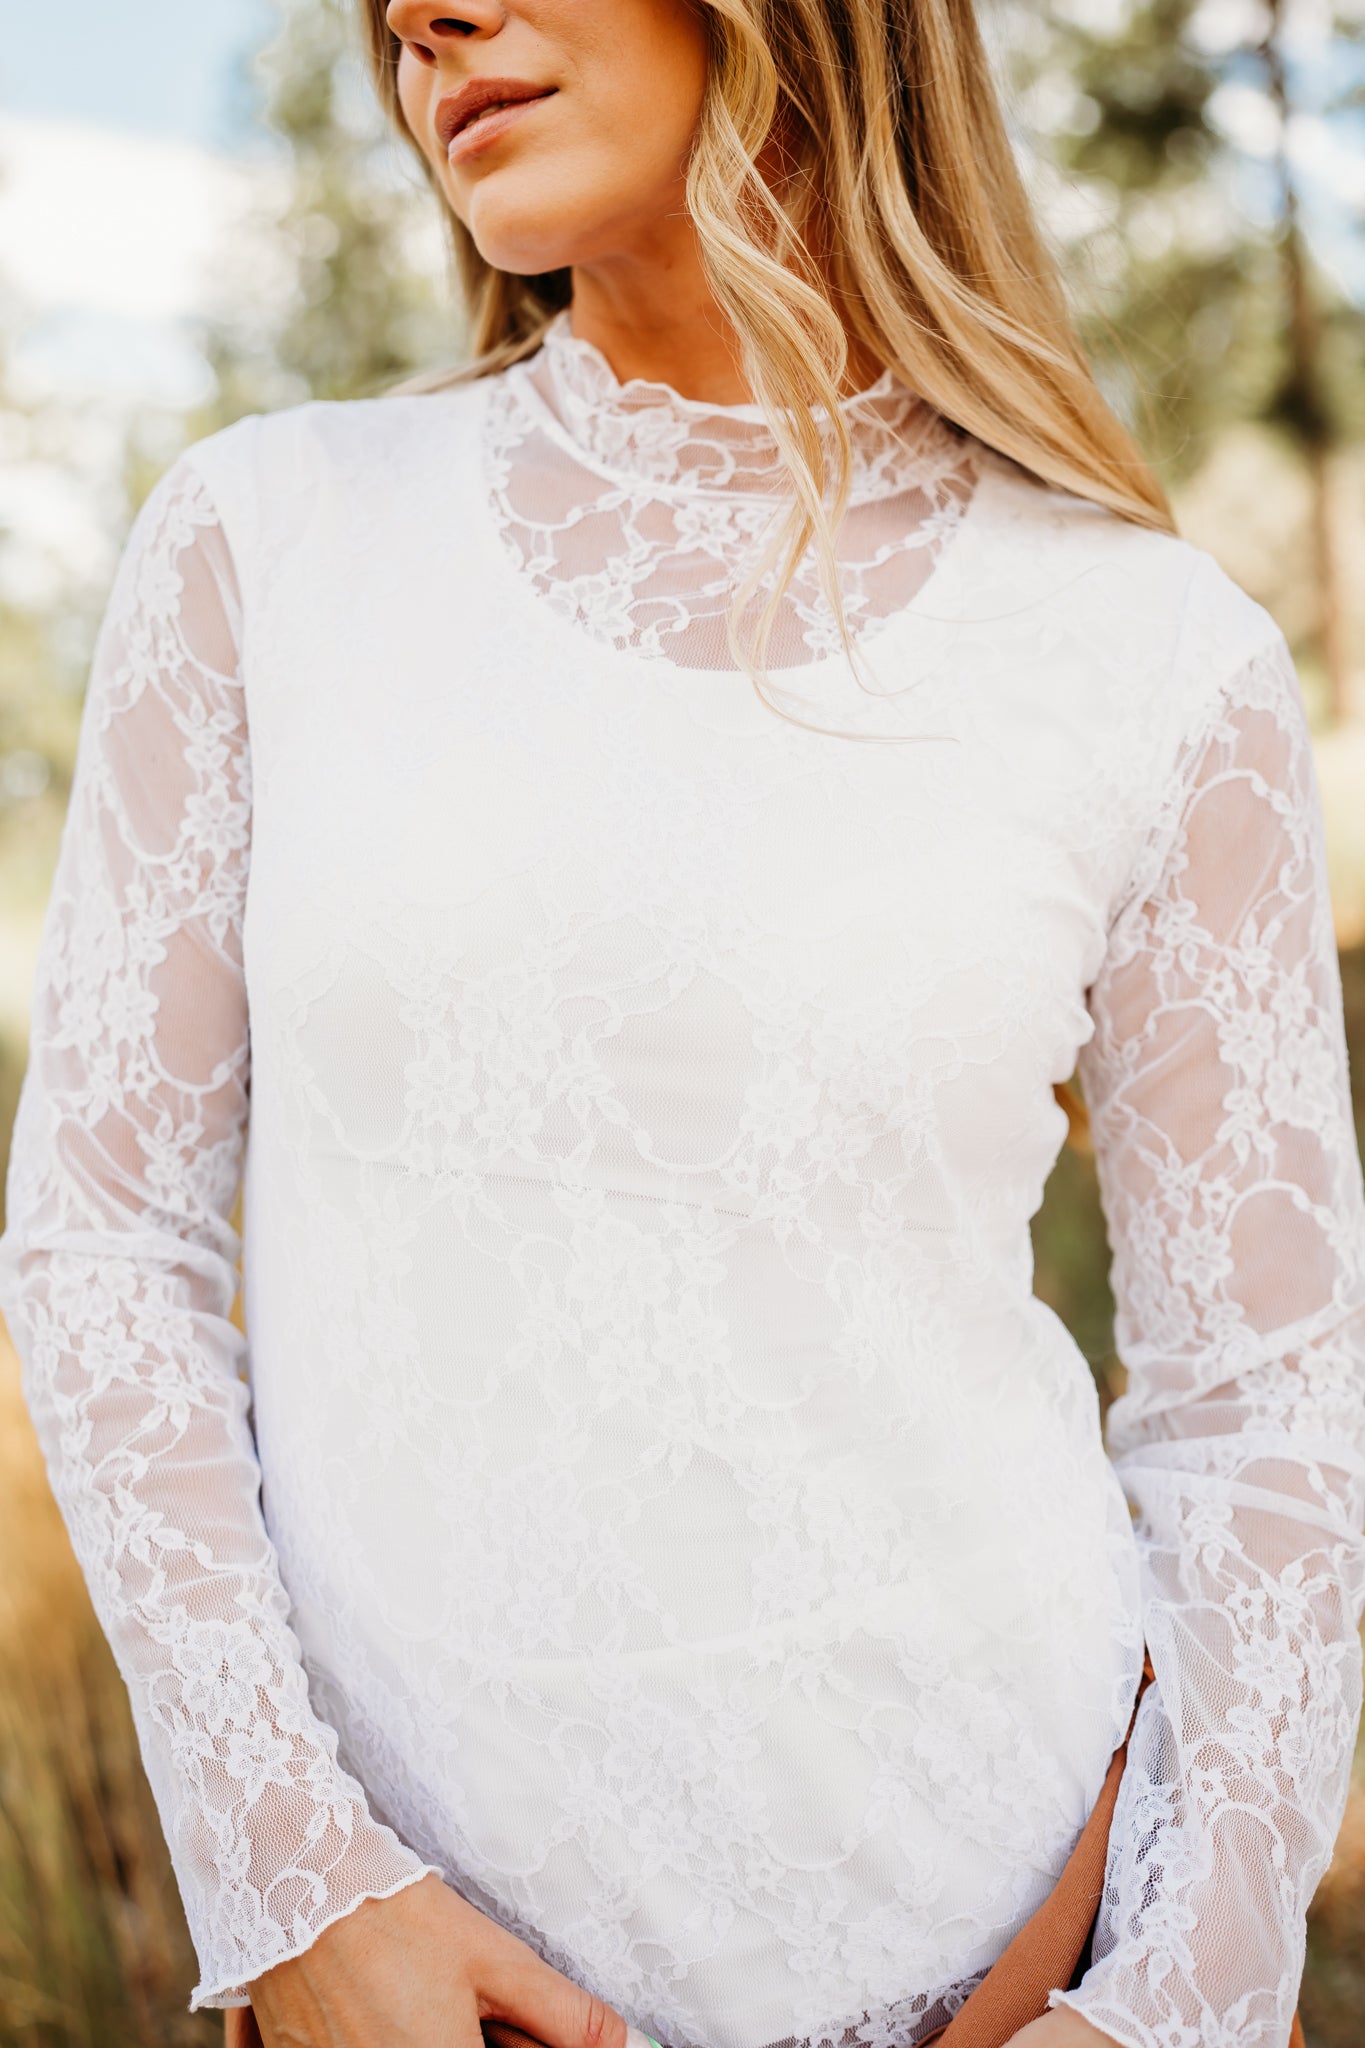 THE FLORAL LACE MOCK NECK TOP IN WHITE